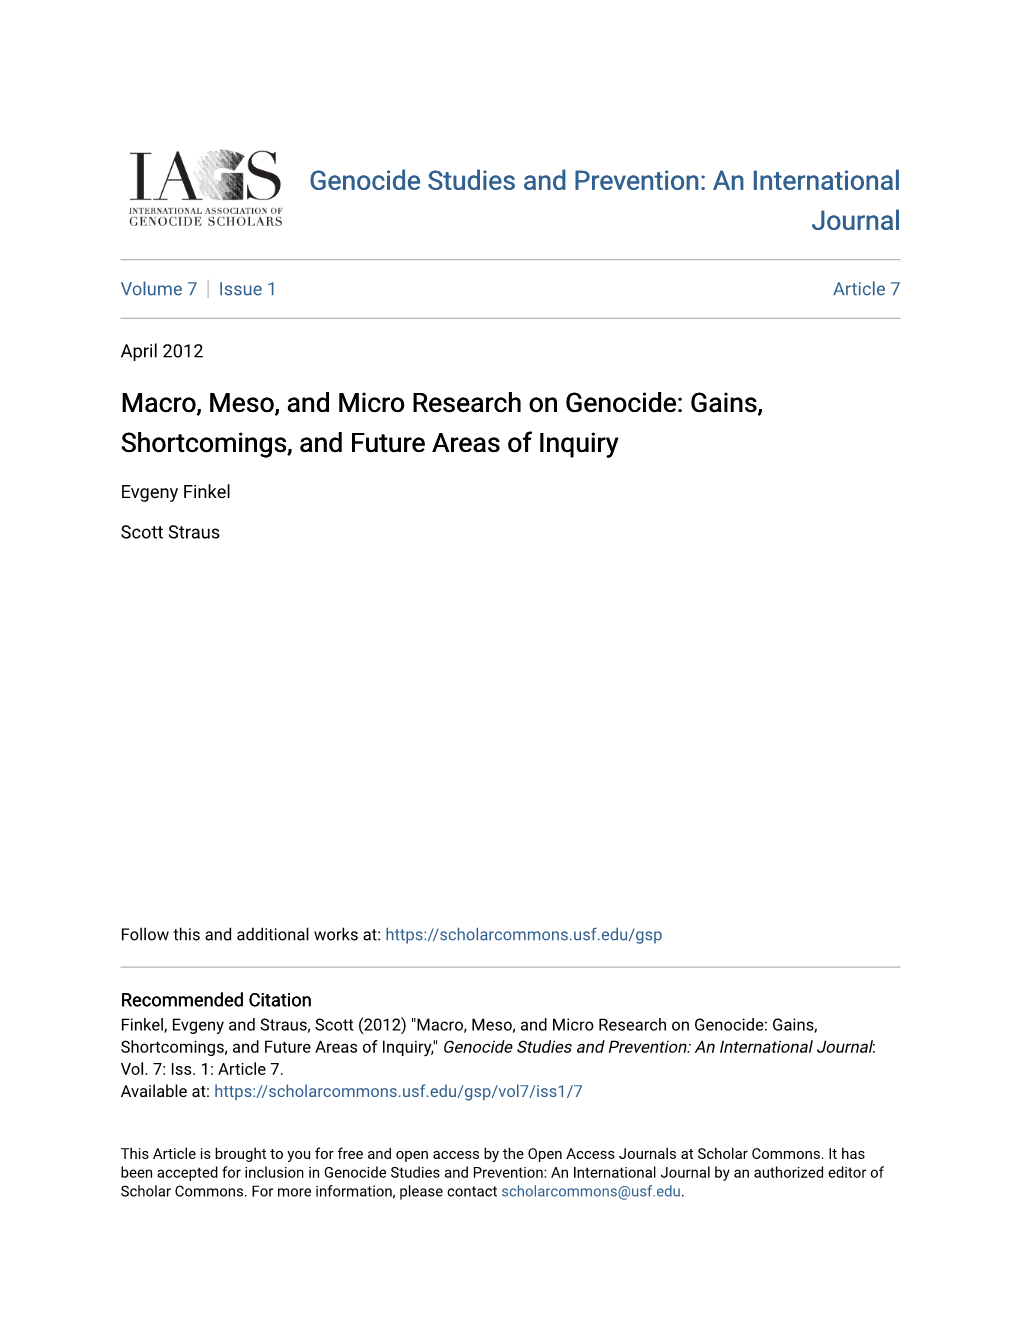 Macro, Meso, and Micro Research on Genocide: Gains, Shortcomings, and Future Areas of Inquiry